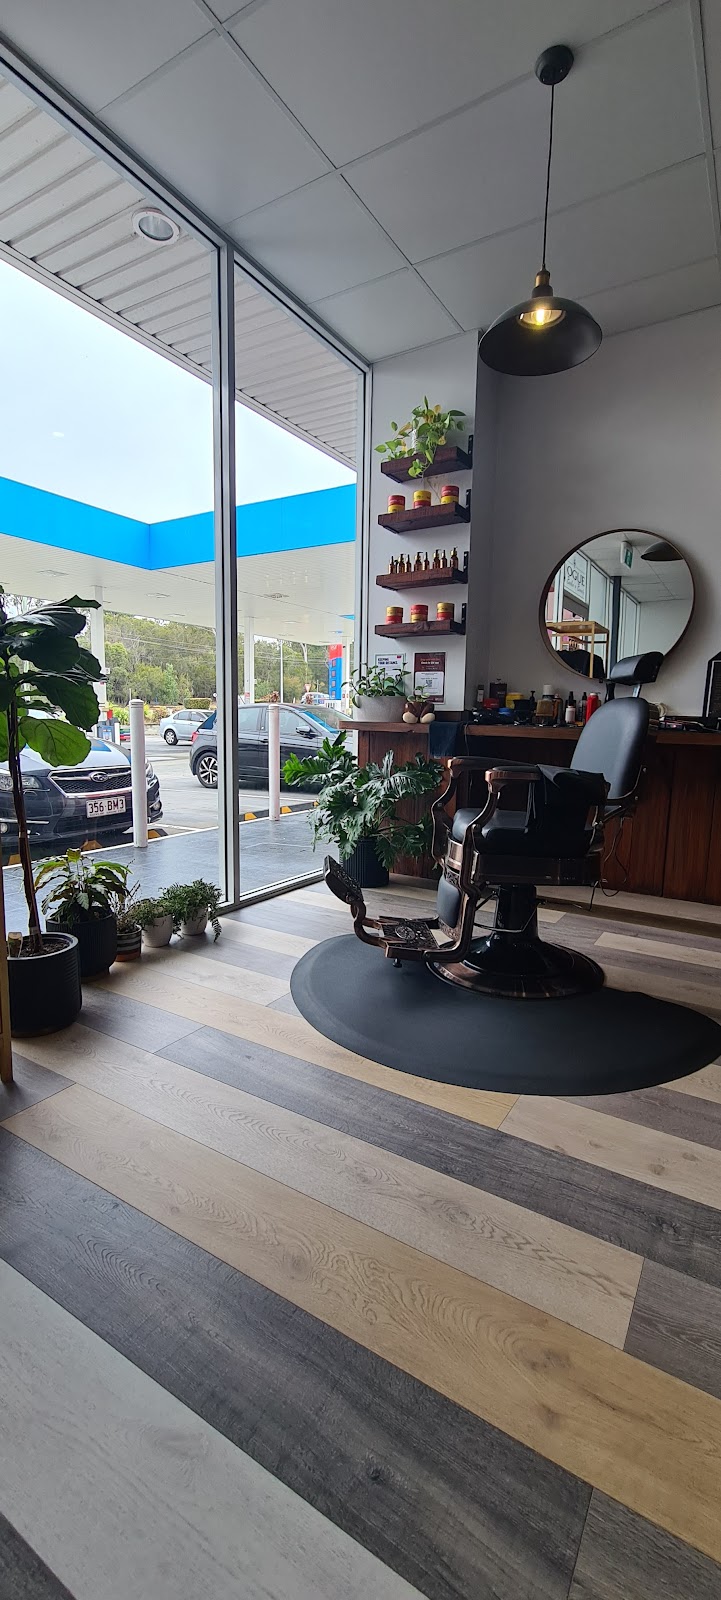 Vogue Barber & Beauty | hair care | 169 Bumstead Rd, Crestmead QLD 4132, Australia | 0403106432 OR +61 403 106 432